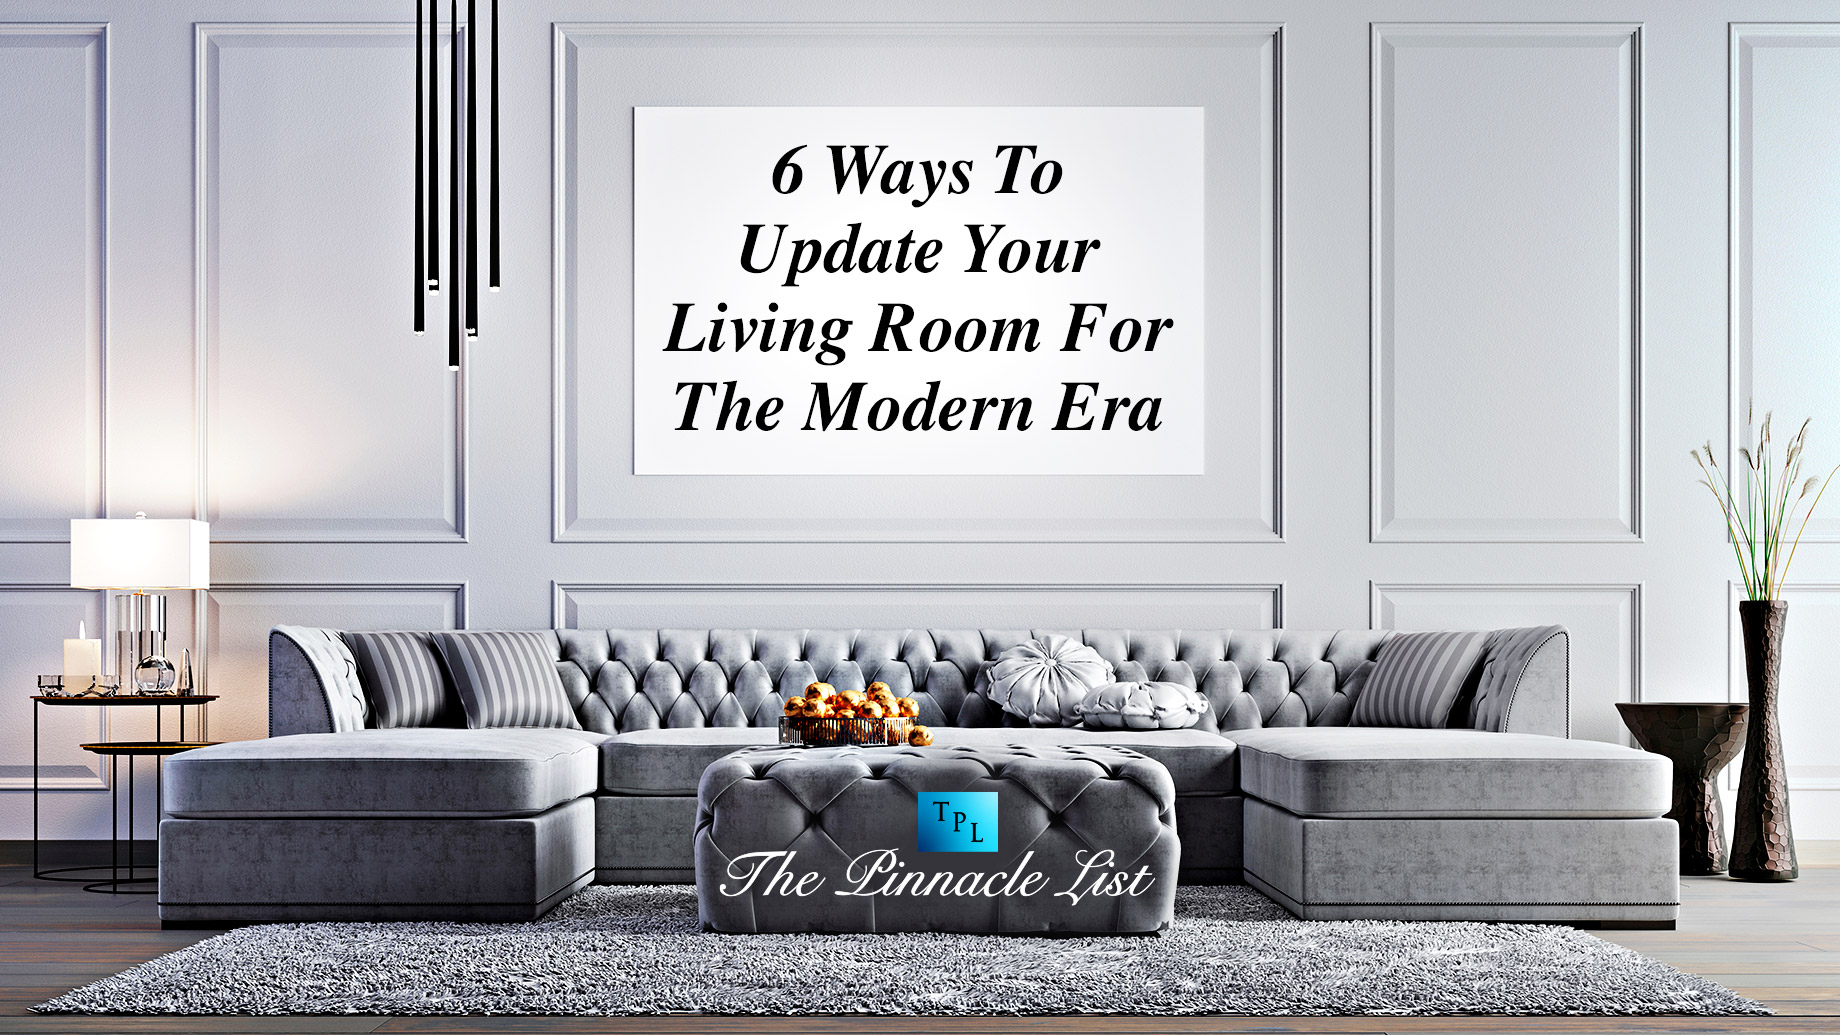 6 Ways To Update Your Living Room For The Modern Era